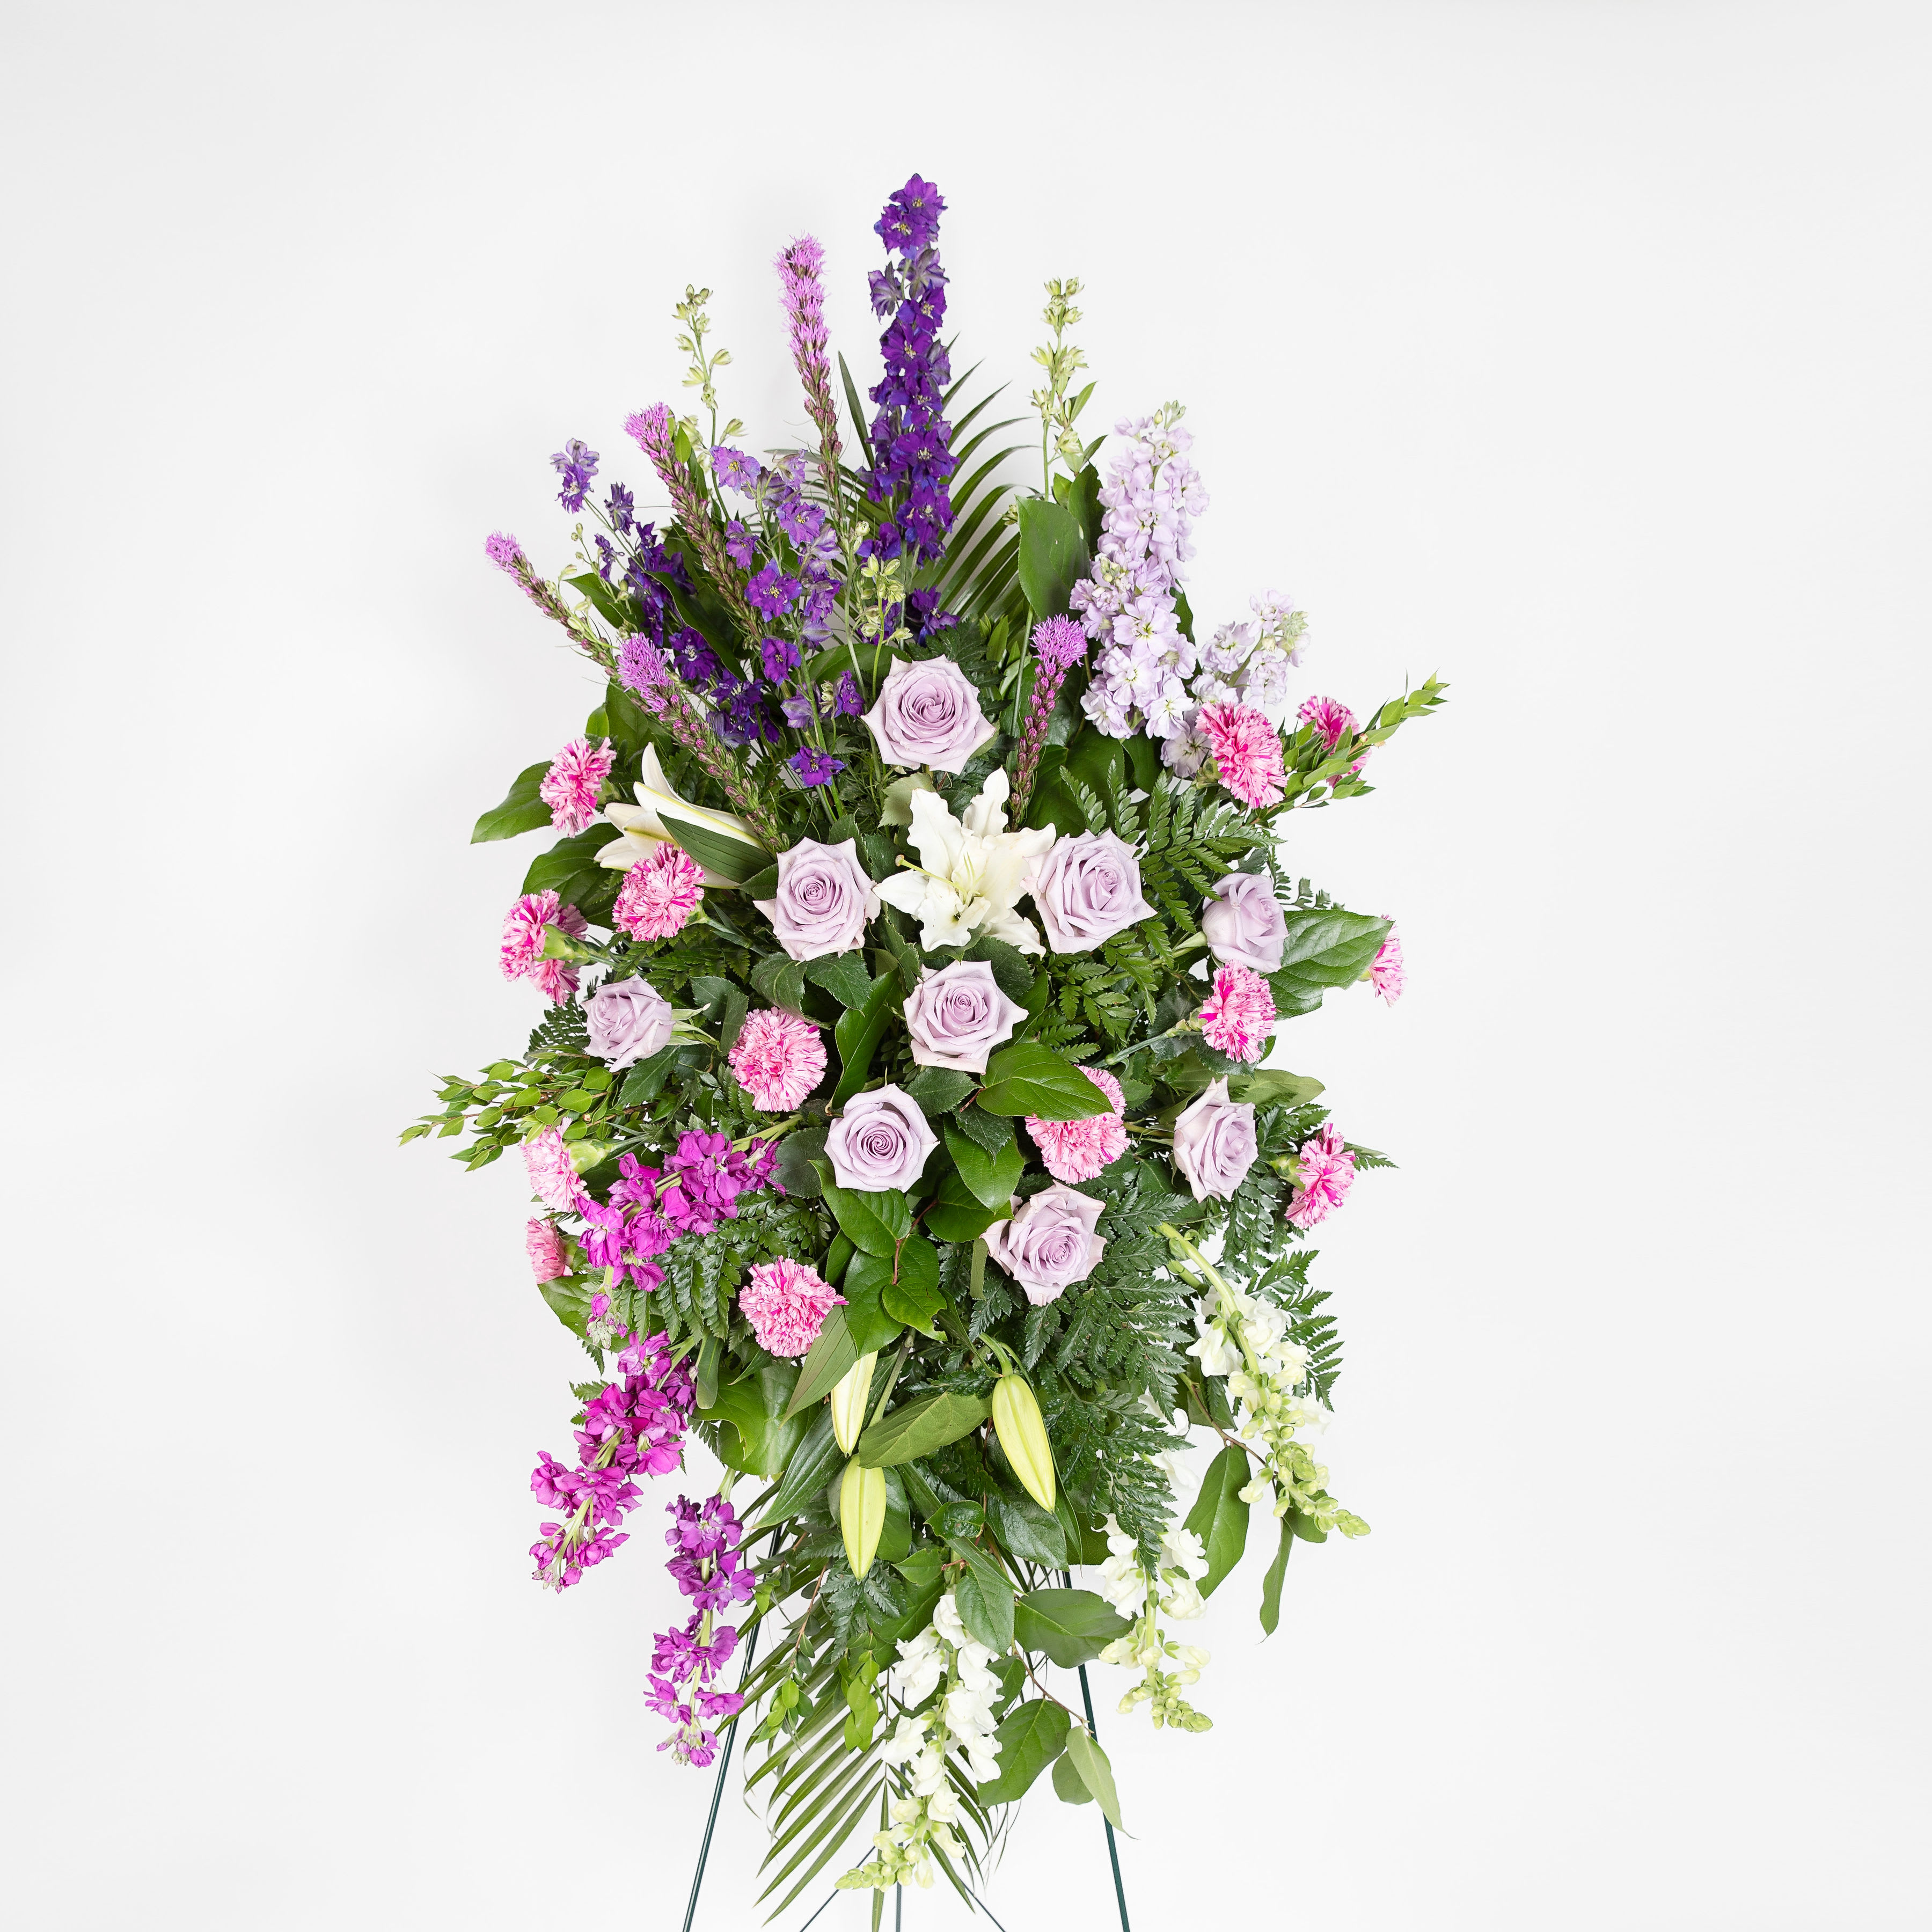 Royal Tribute Standing Easel Spray  - A lovely lavender spray of flowers lets you share your compassion, hope and beauty with all. Beautifully simple. Beautifully serene. It's the perfect way to send your sincere sympathy. 